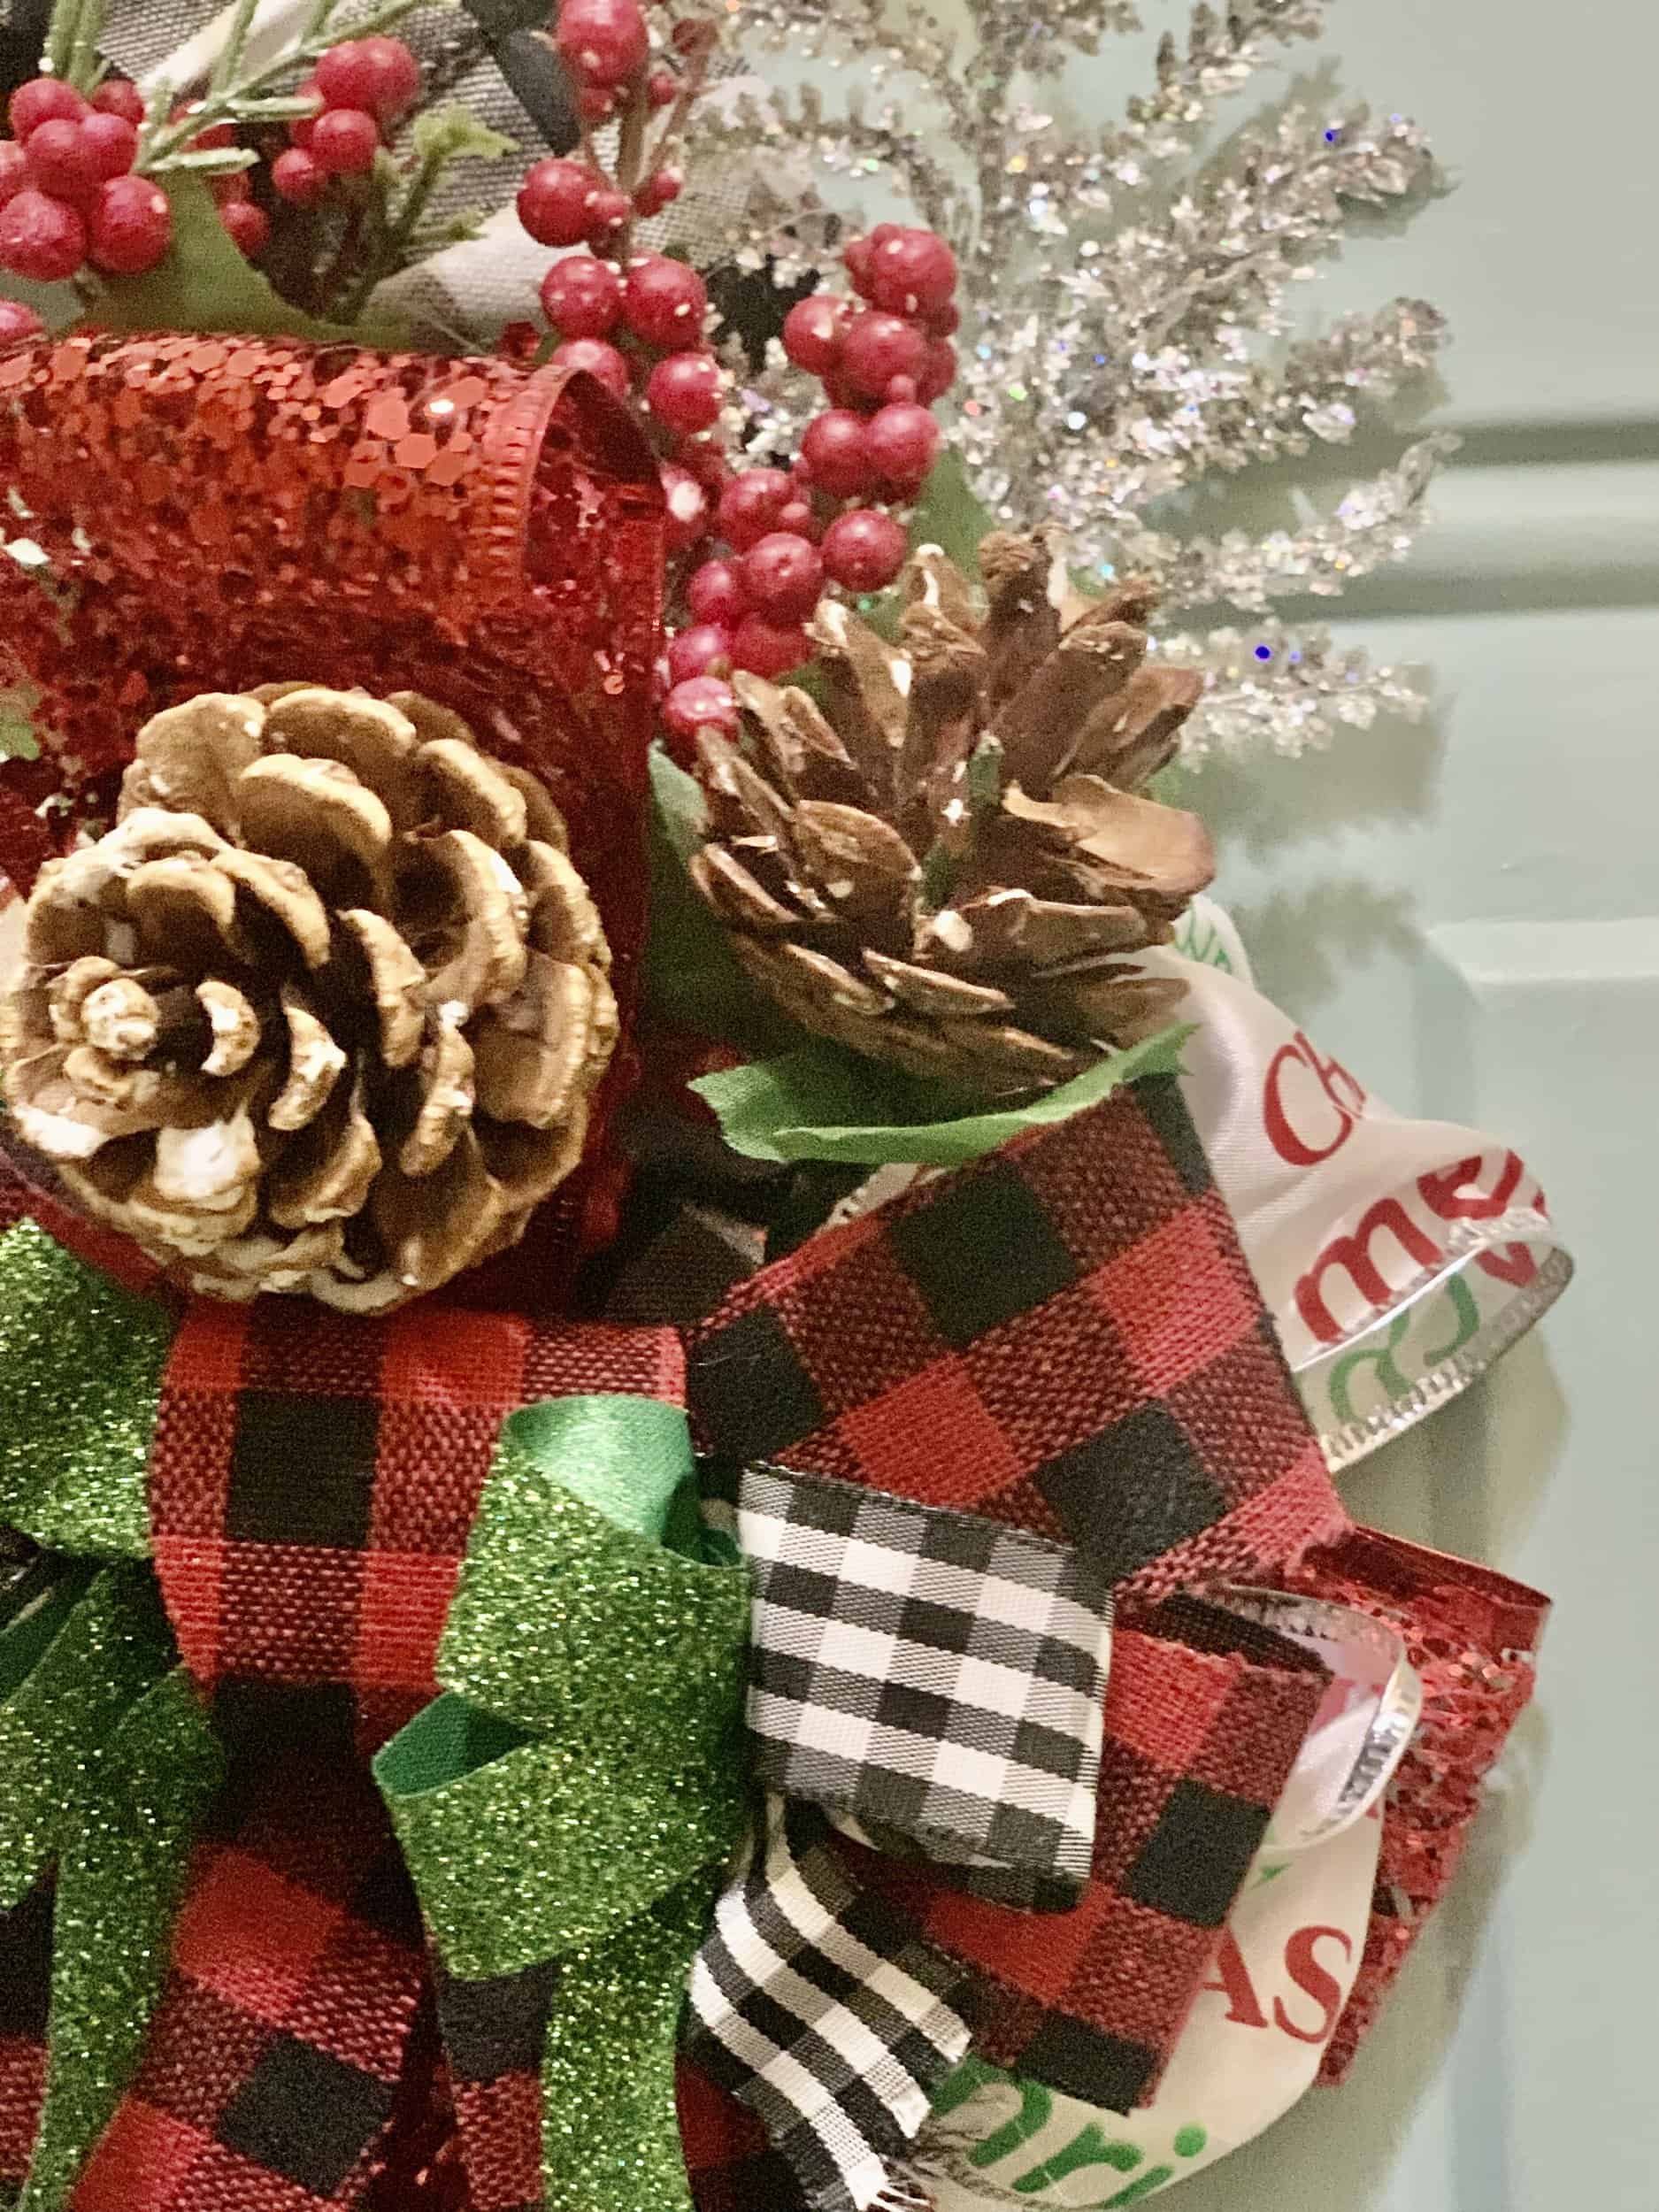 This Candy Cane Wreath is made with love by Willow Chic Designs! Shop more unique gift ideas today with Spots Initiatives, the best way to support creators.